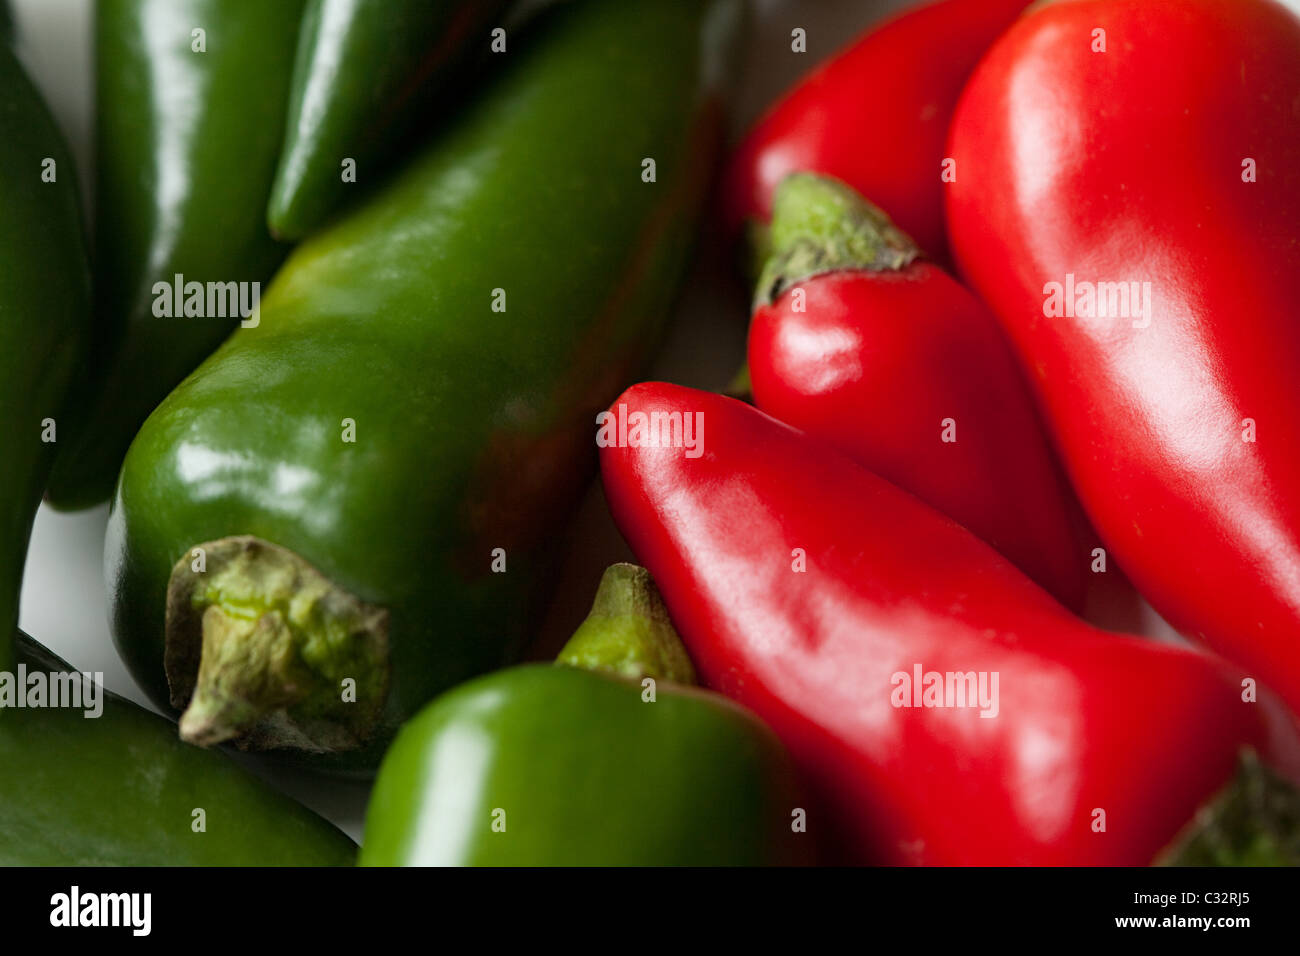 Green and red chilli peppers, full frame Stock Photo